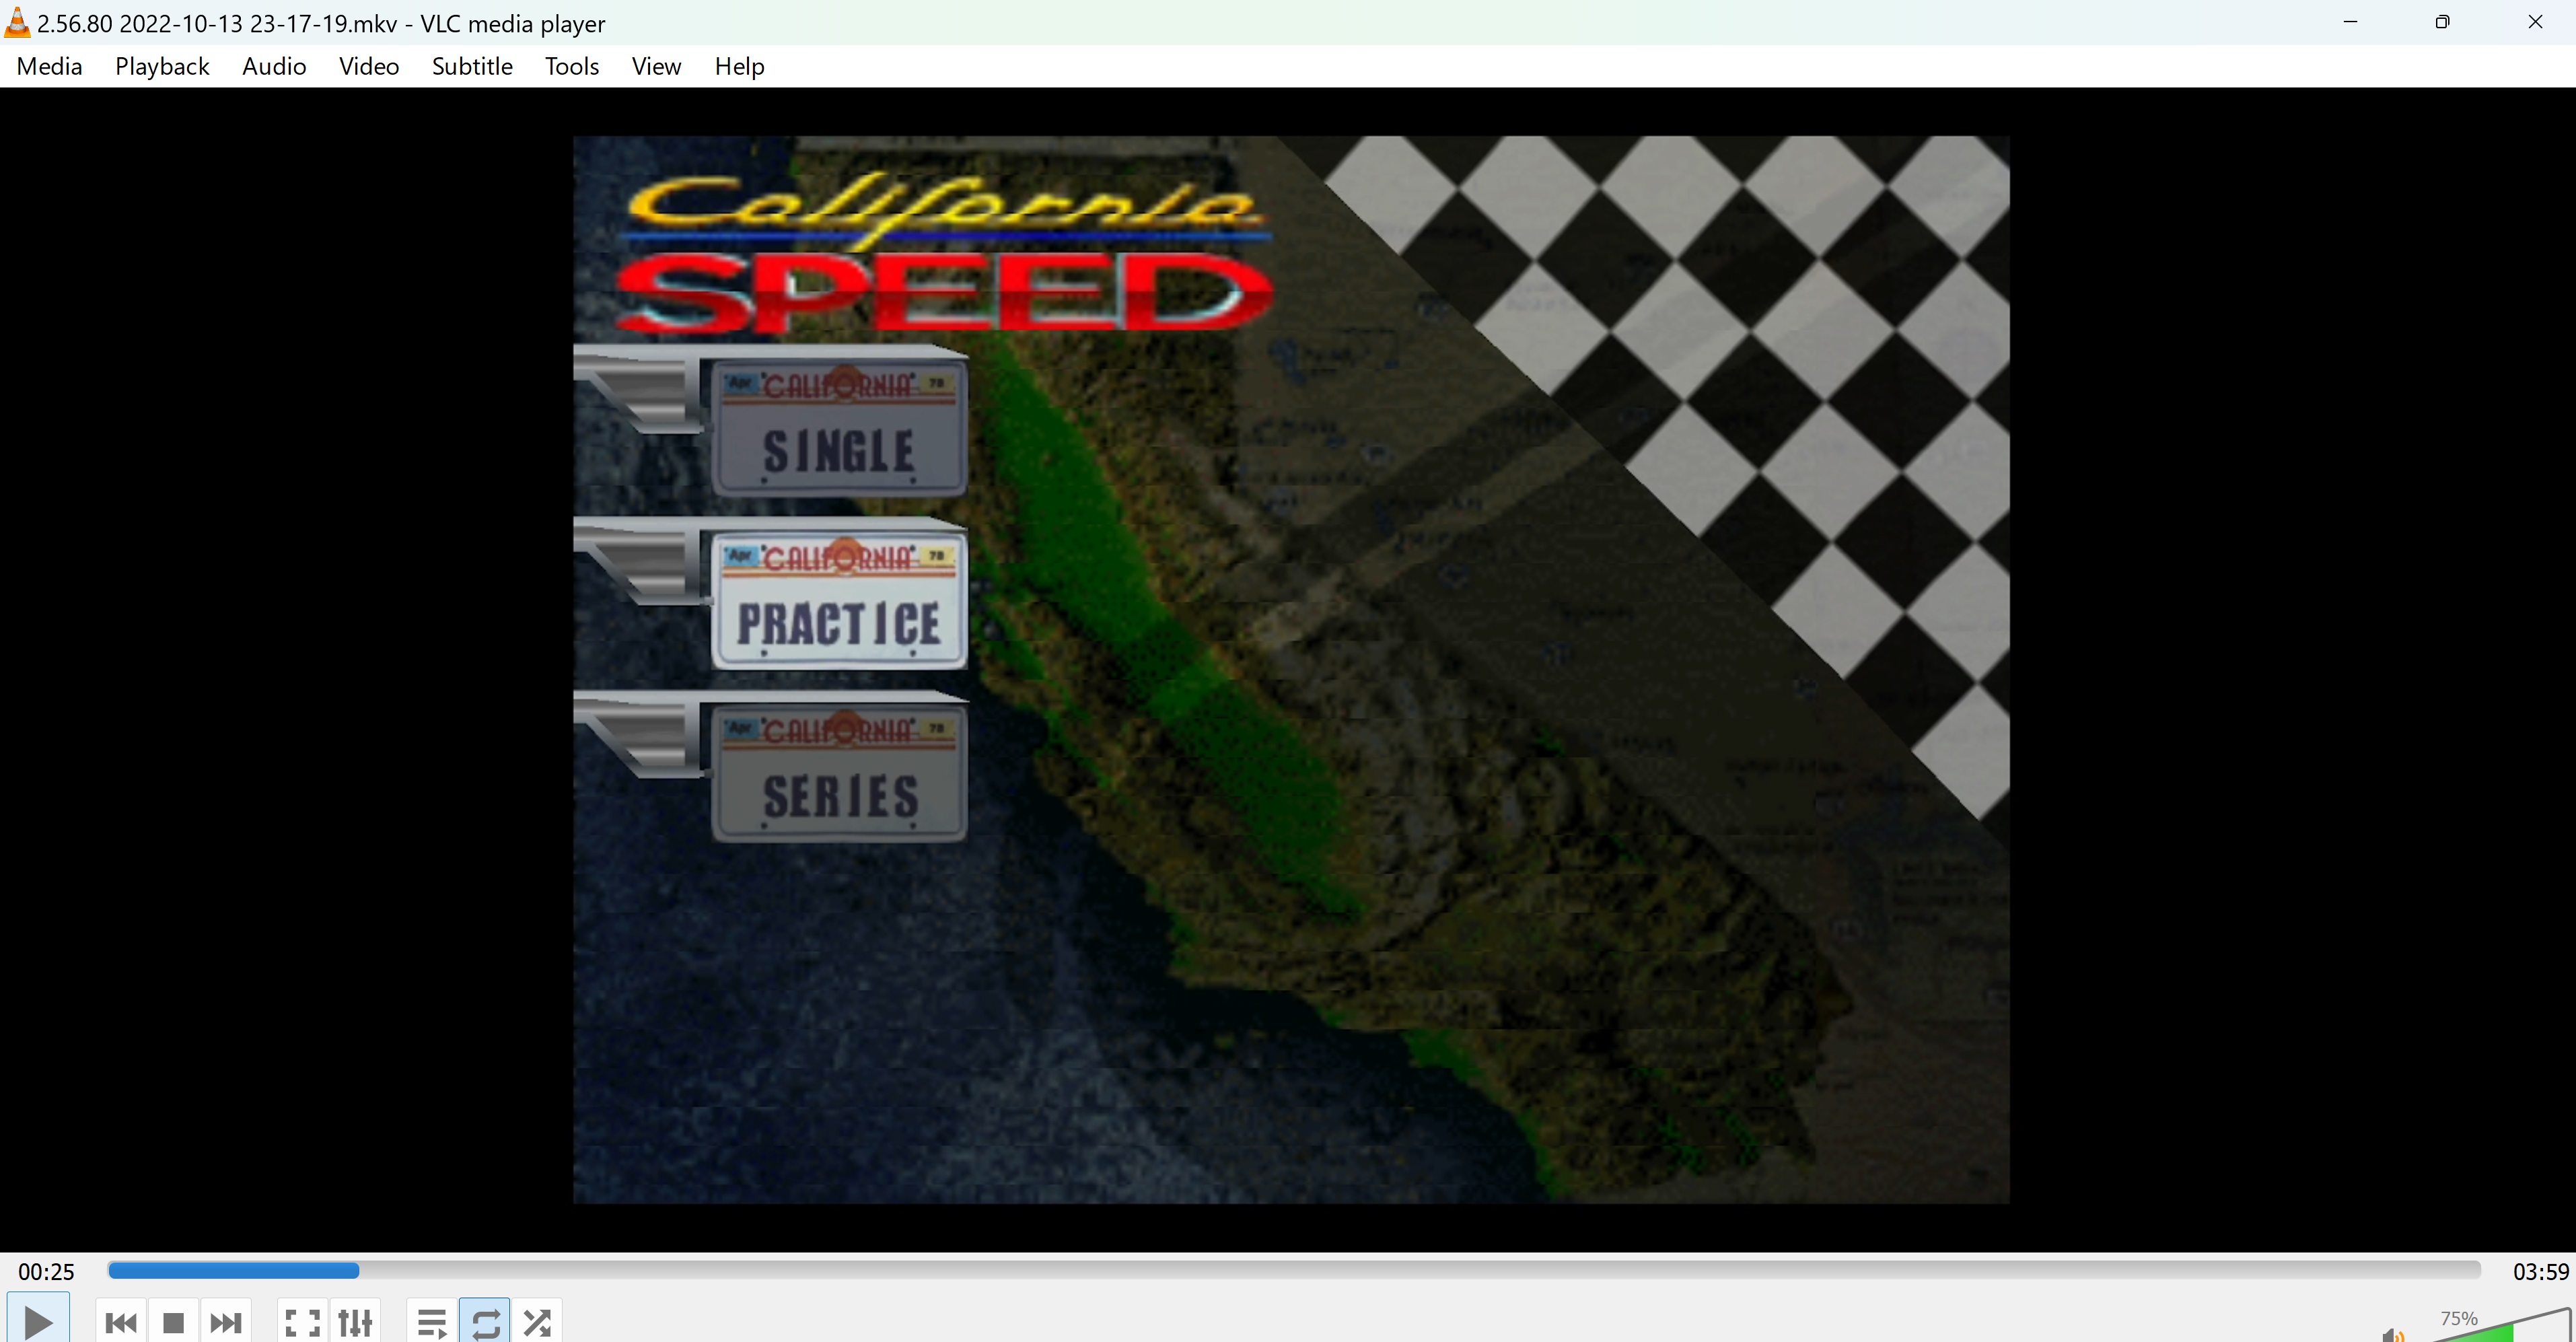 California Speed: Practice [Central Valley] time of 0:02:56.8